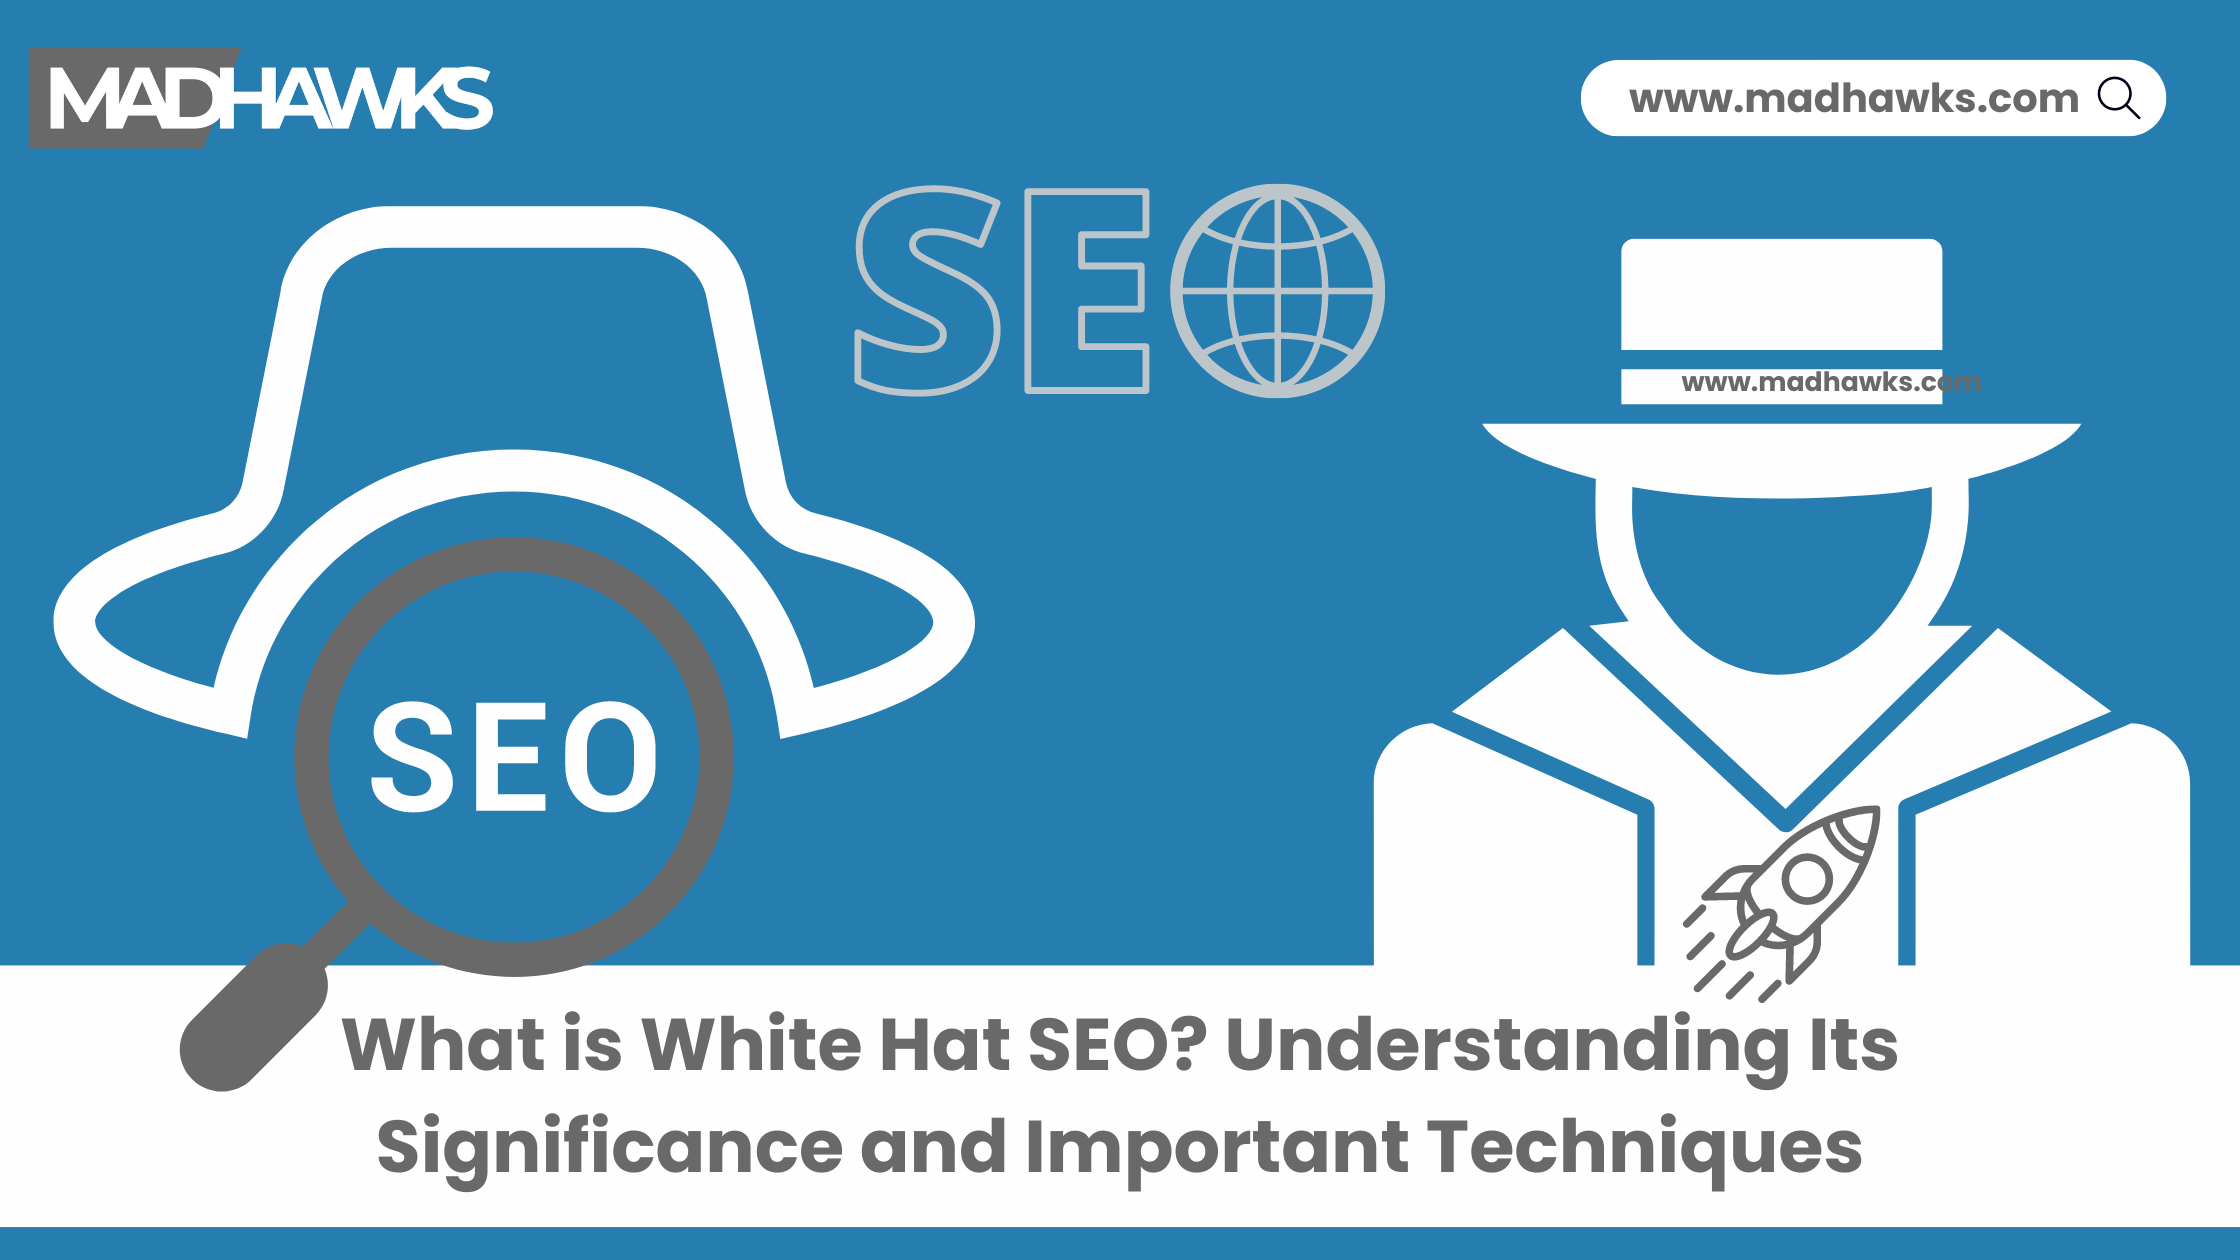 What is White Hat SEO? Understanding Its Significance and Important Techniques